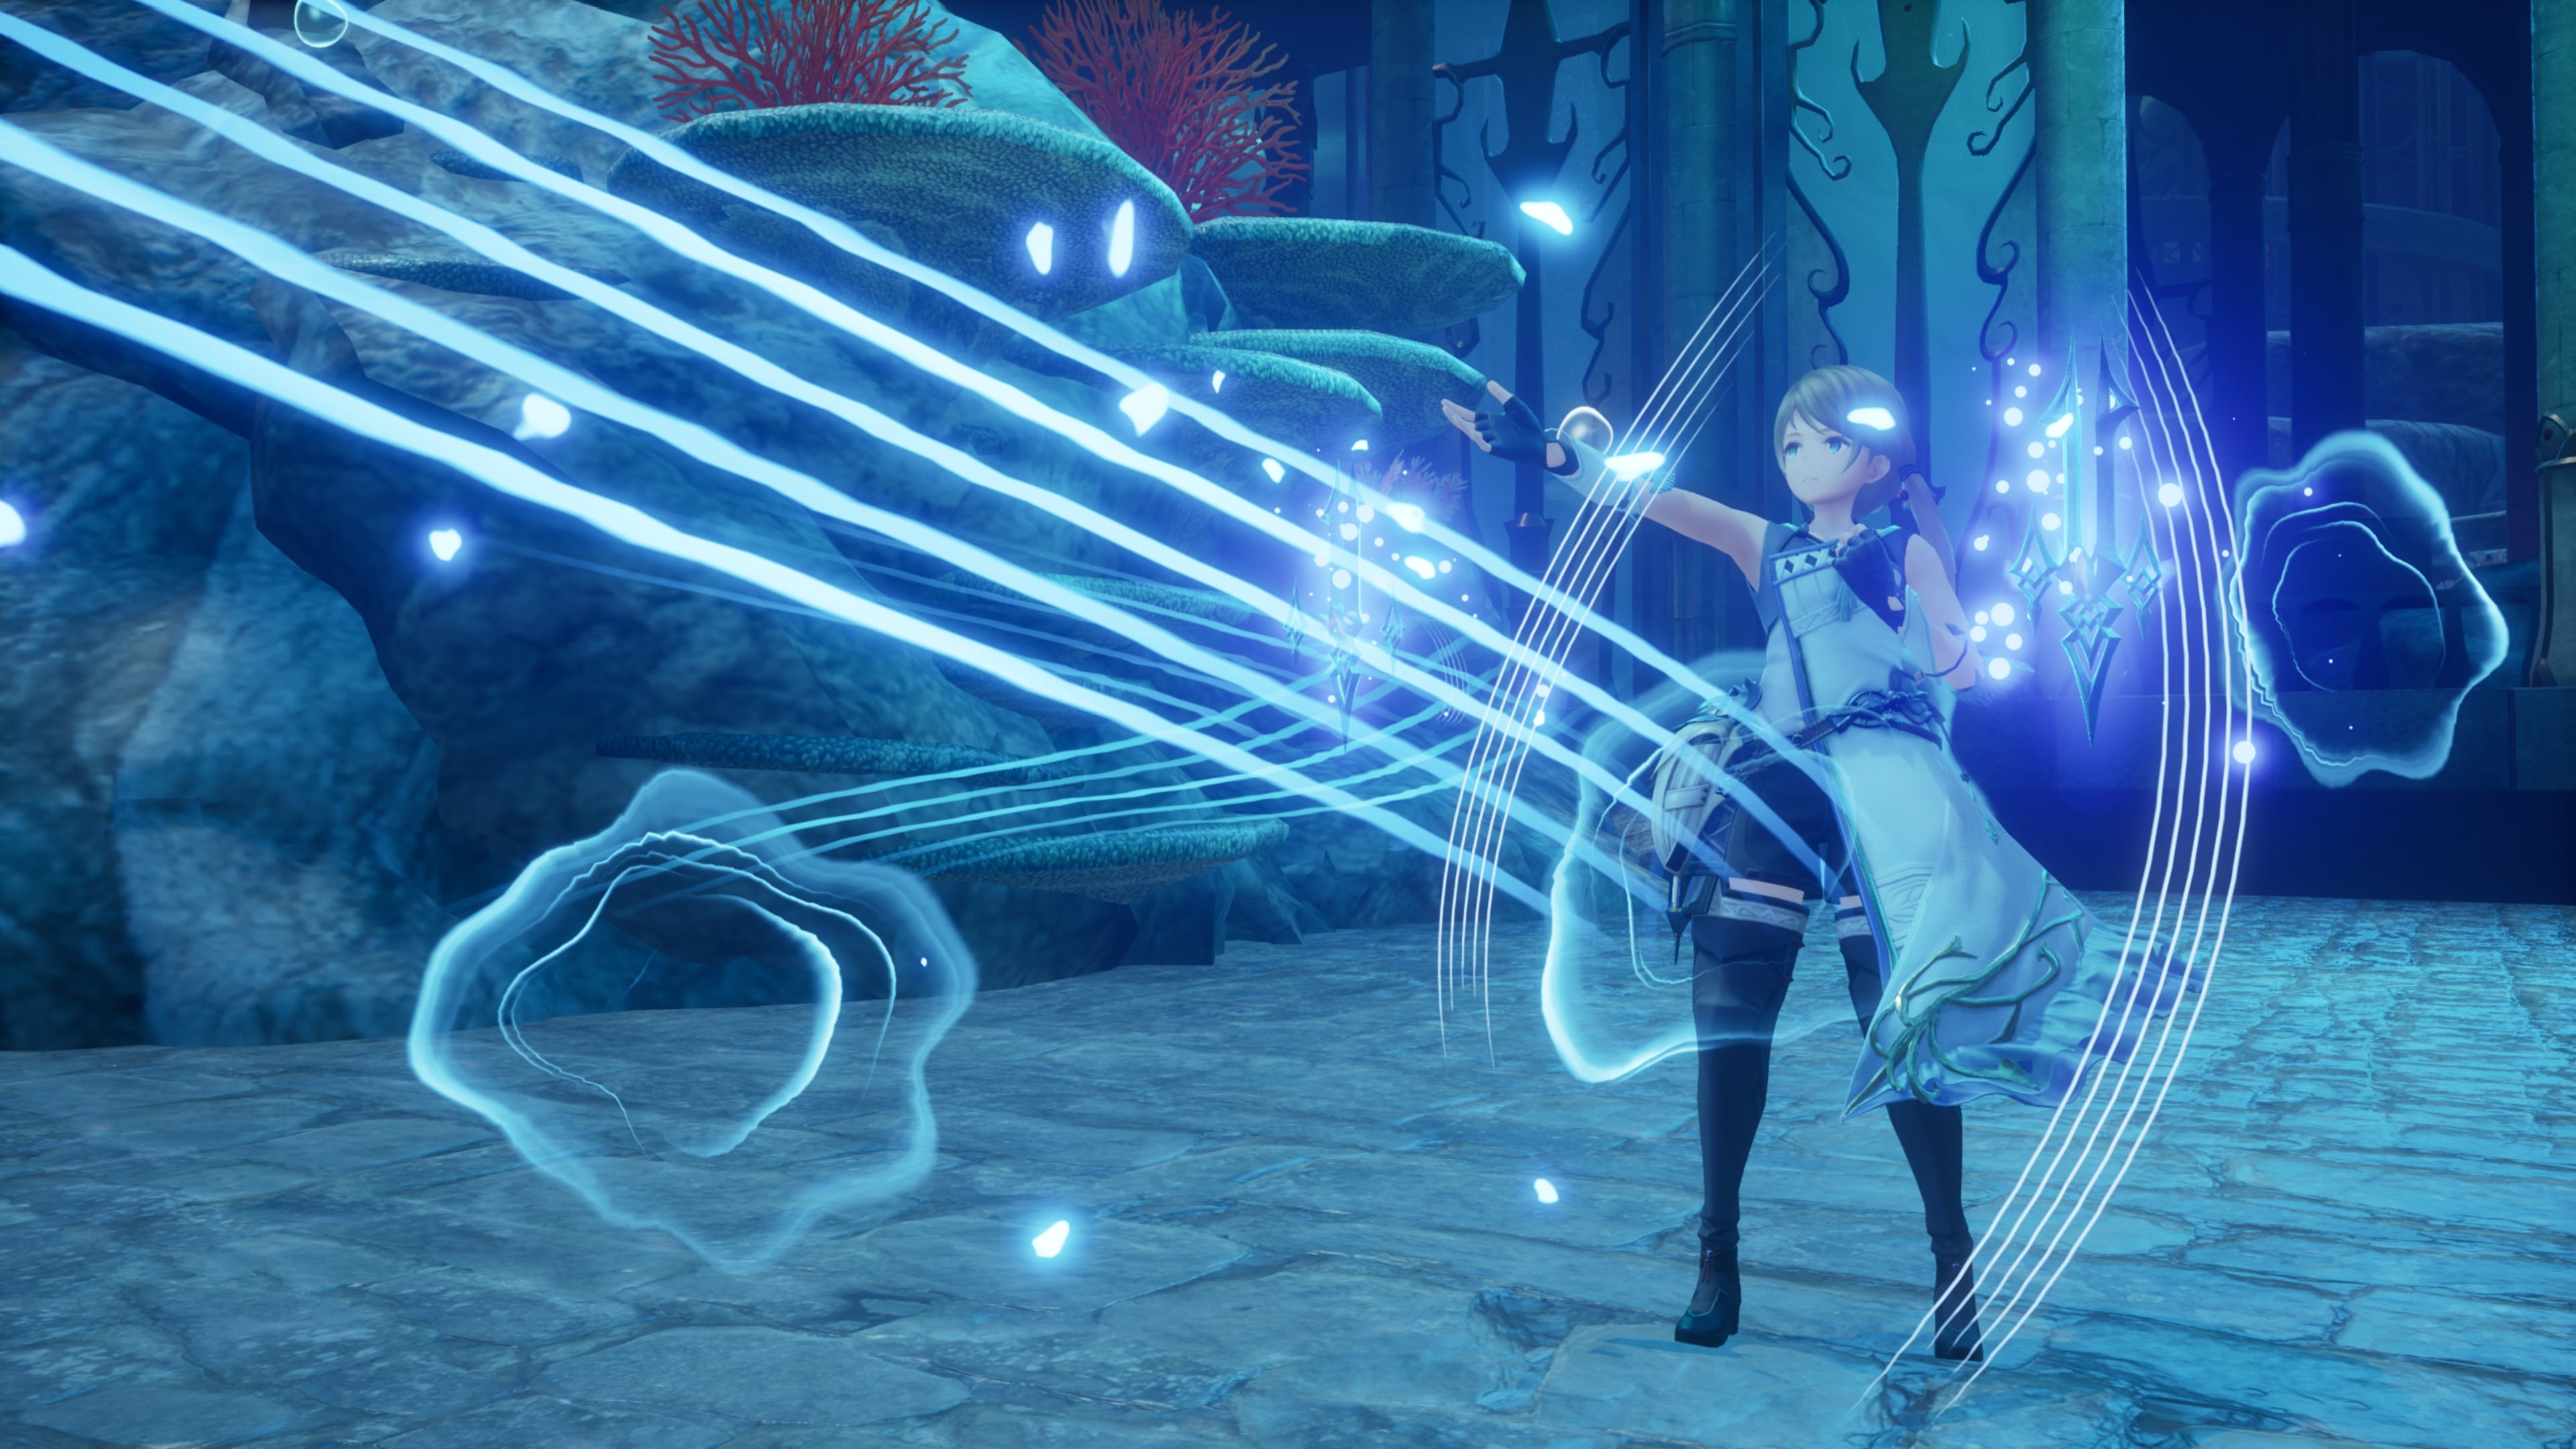 A character of the Woglinde combat class is casting spells in Harvestella